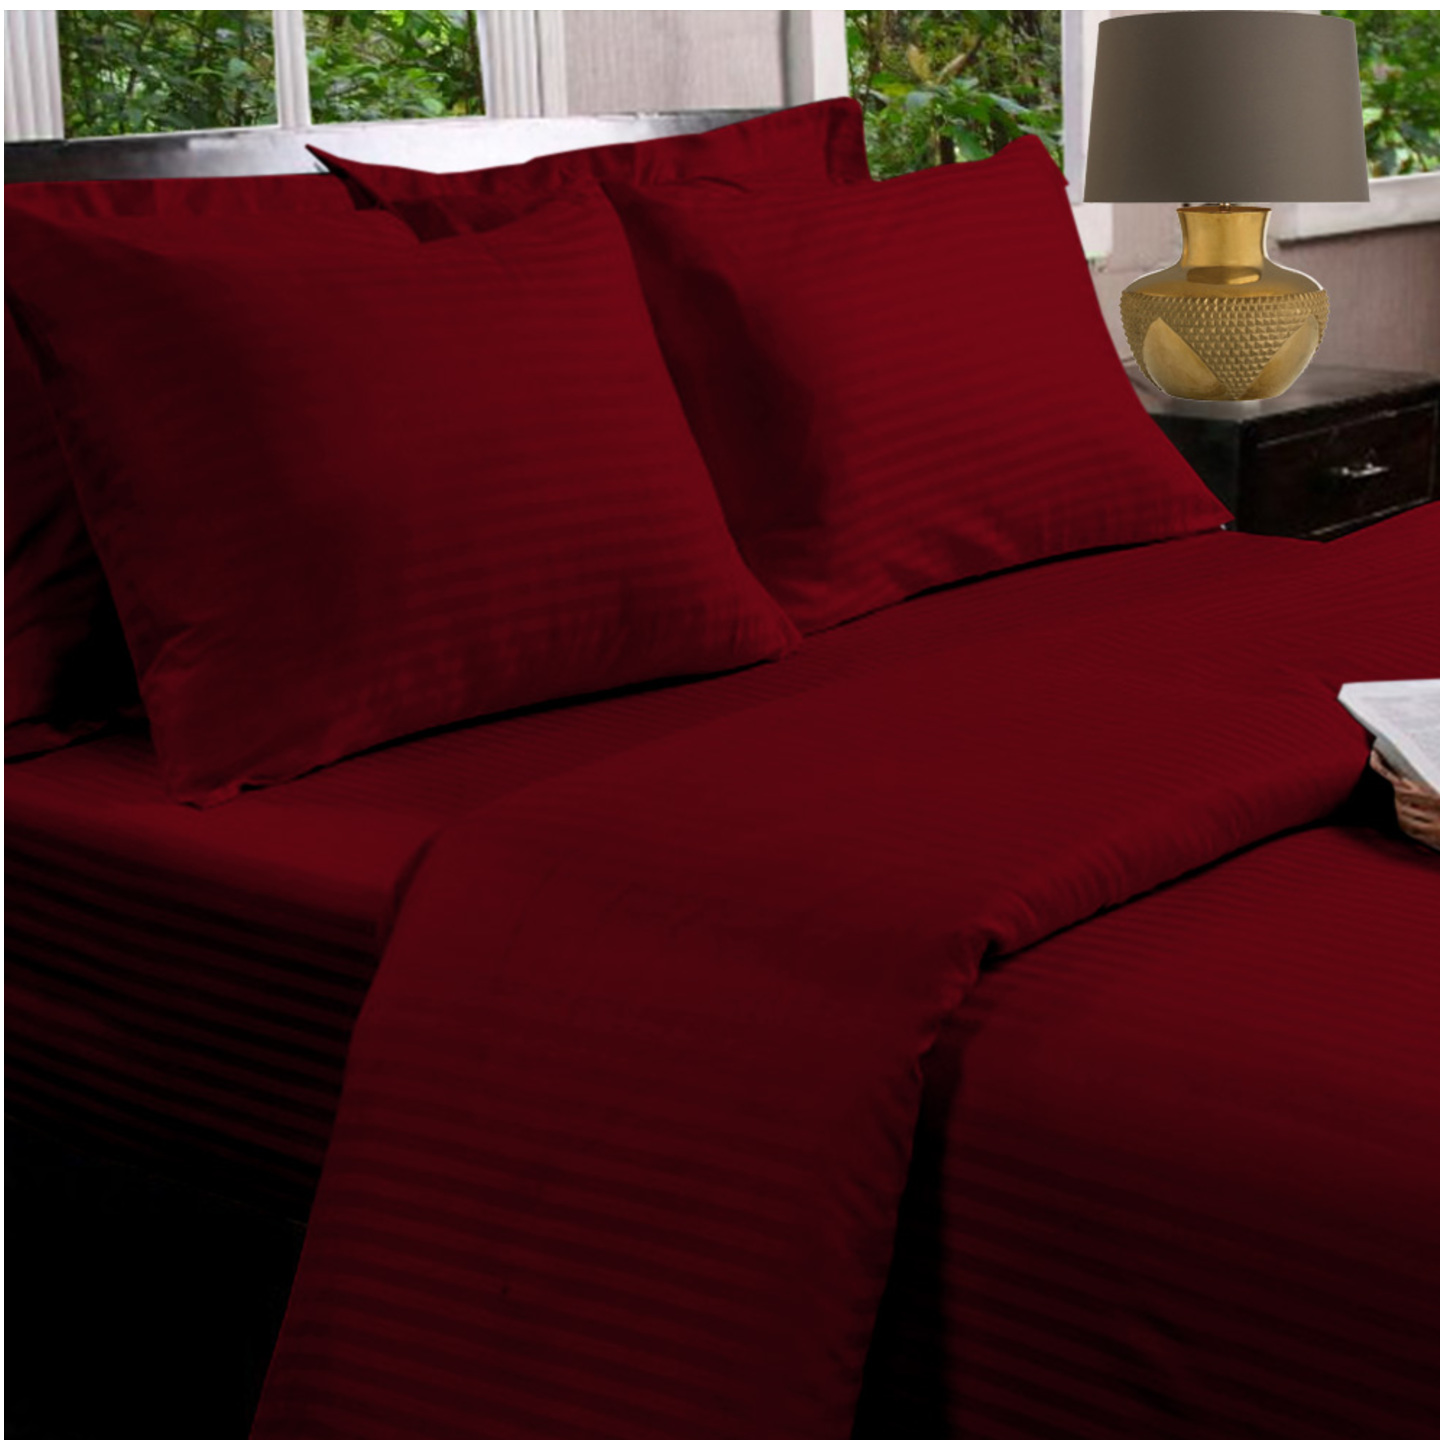 Burgundy Maroon - 100% Cotton - 330 Thread Count Sateen Fitted Sheets -  Queen Size